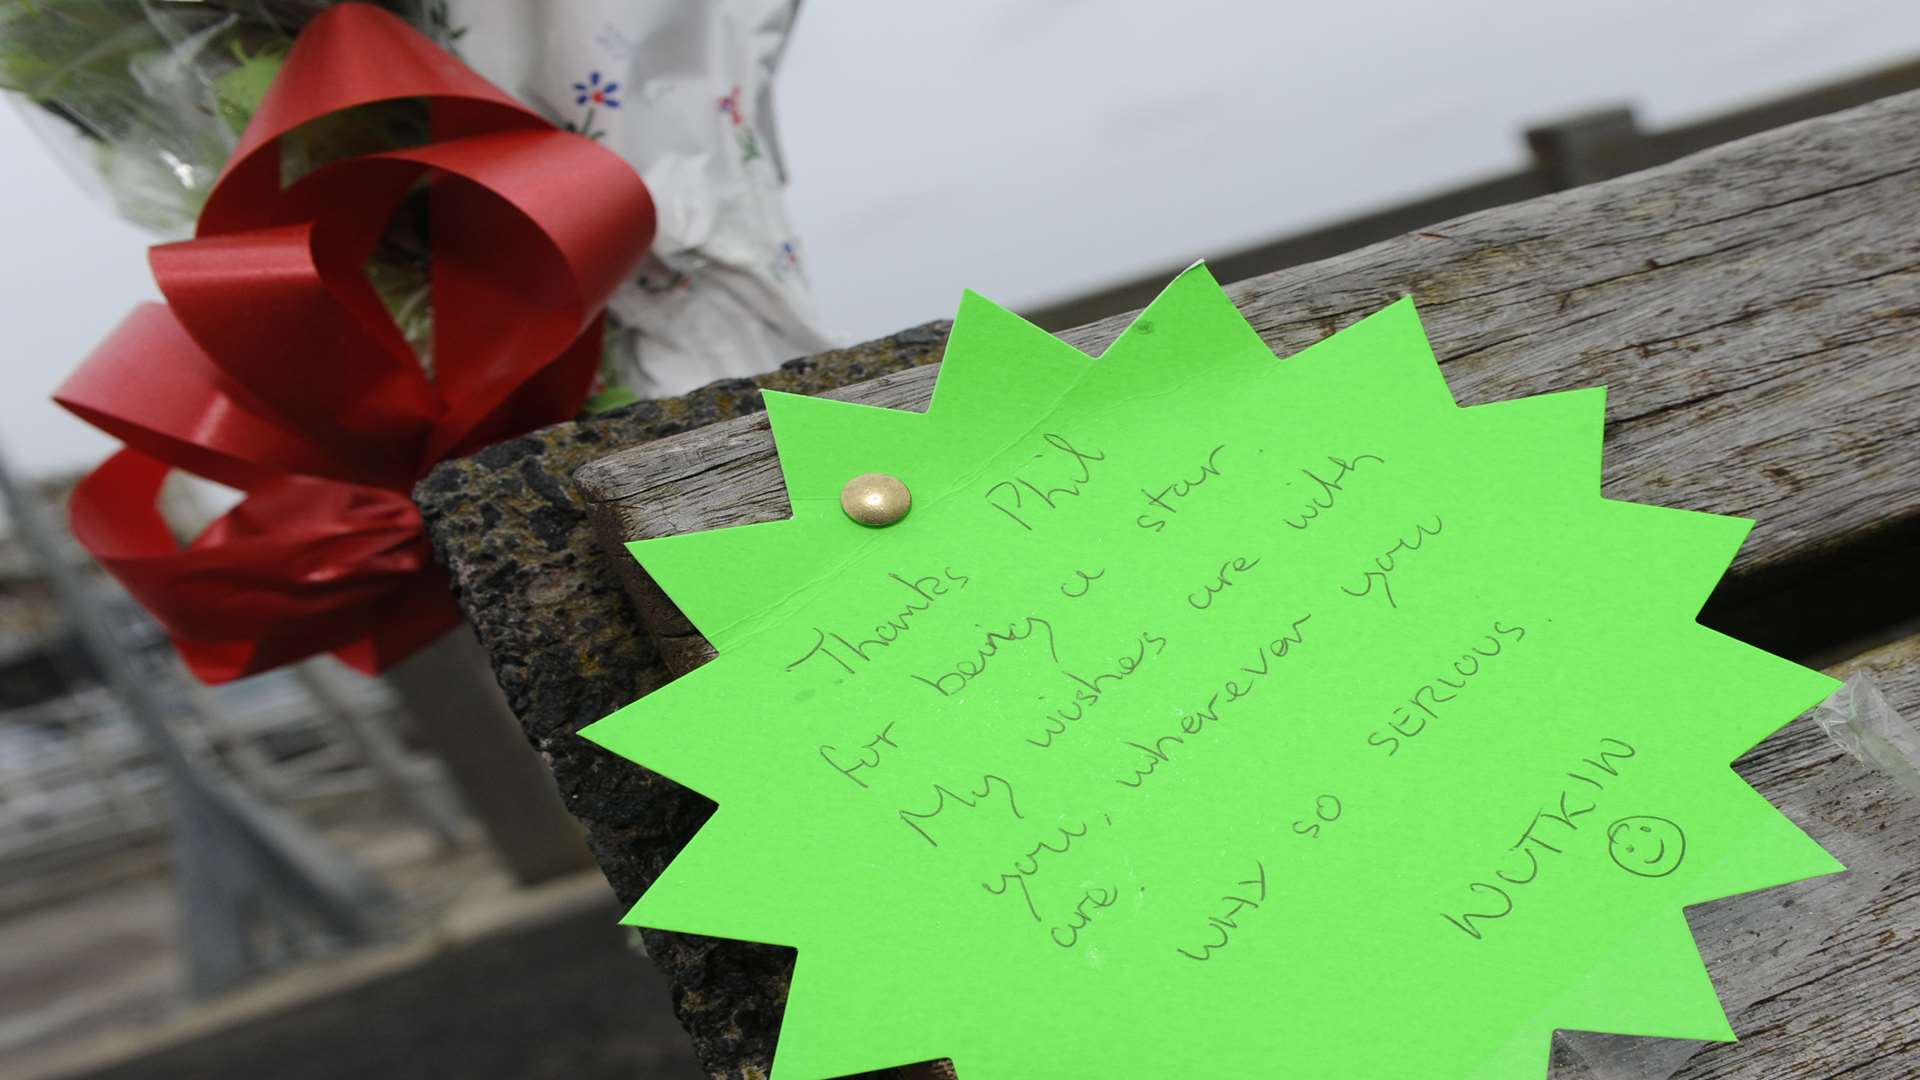 One of the tributes left at the scene